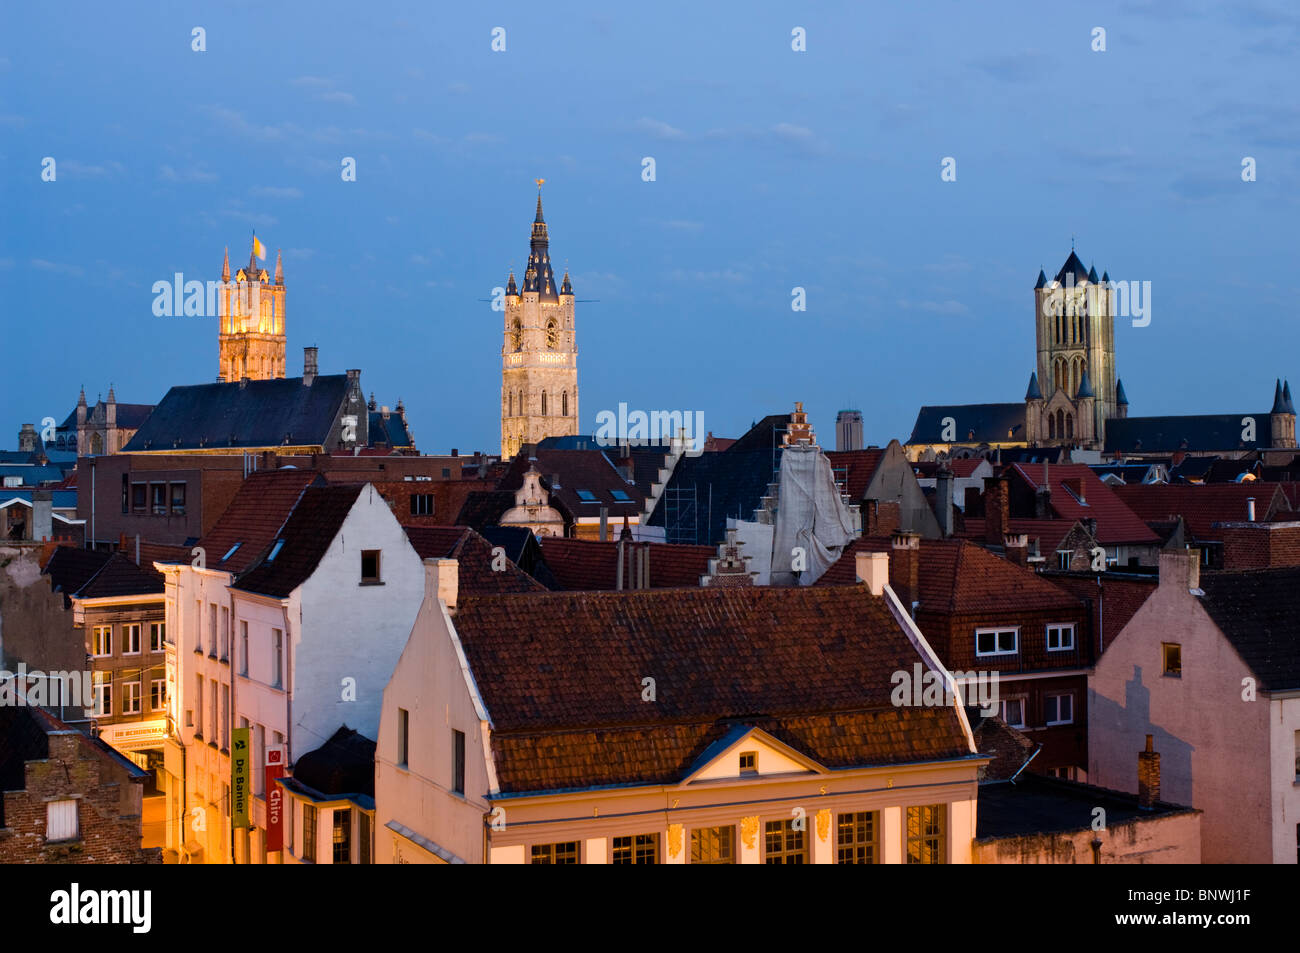 Belgium, Ghent, St Bavos Cathedral and Belfry of Ghent and red tiled roofs at dusk, Sint Baafskathedraal Stock Photo